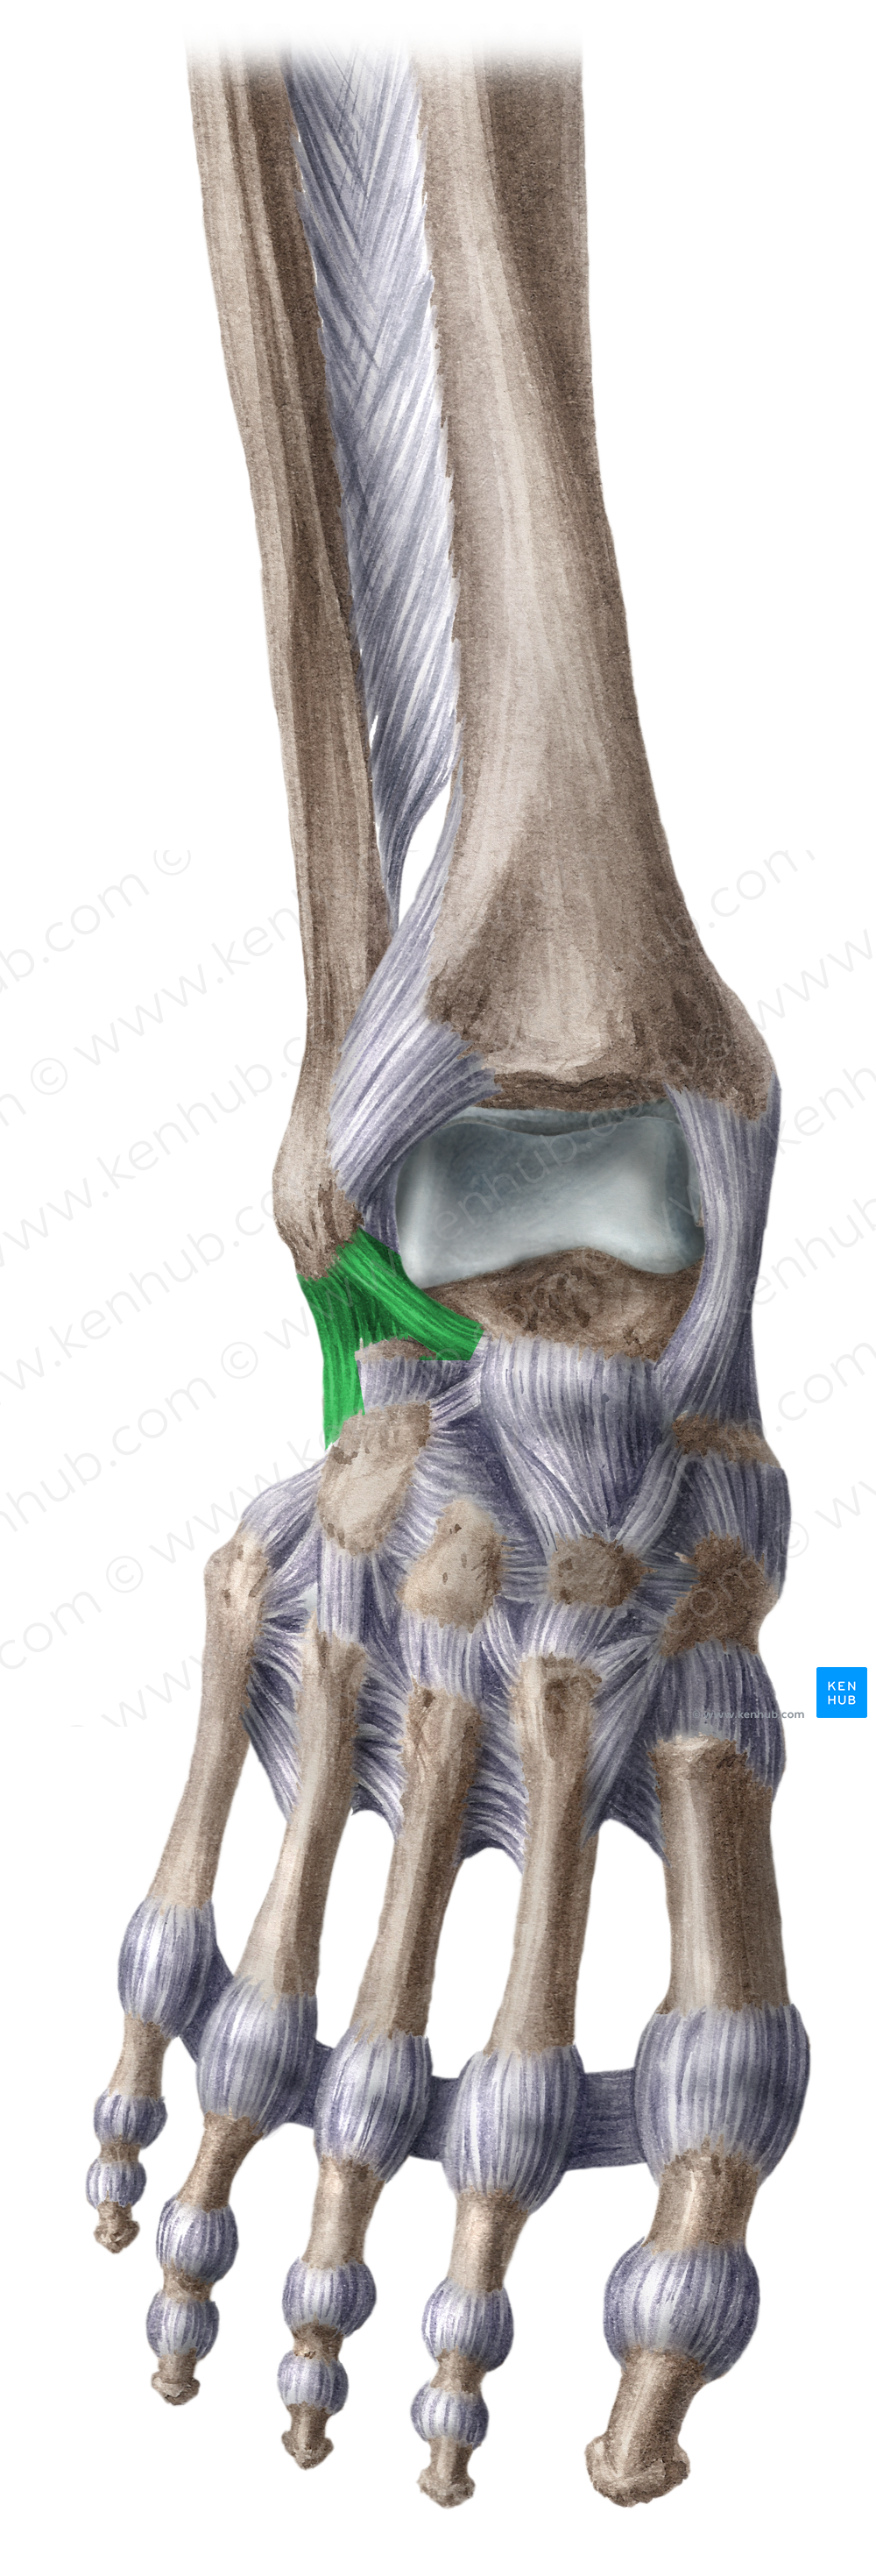 Lateral collateral ligament of ankle joint (#4491)